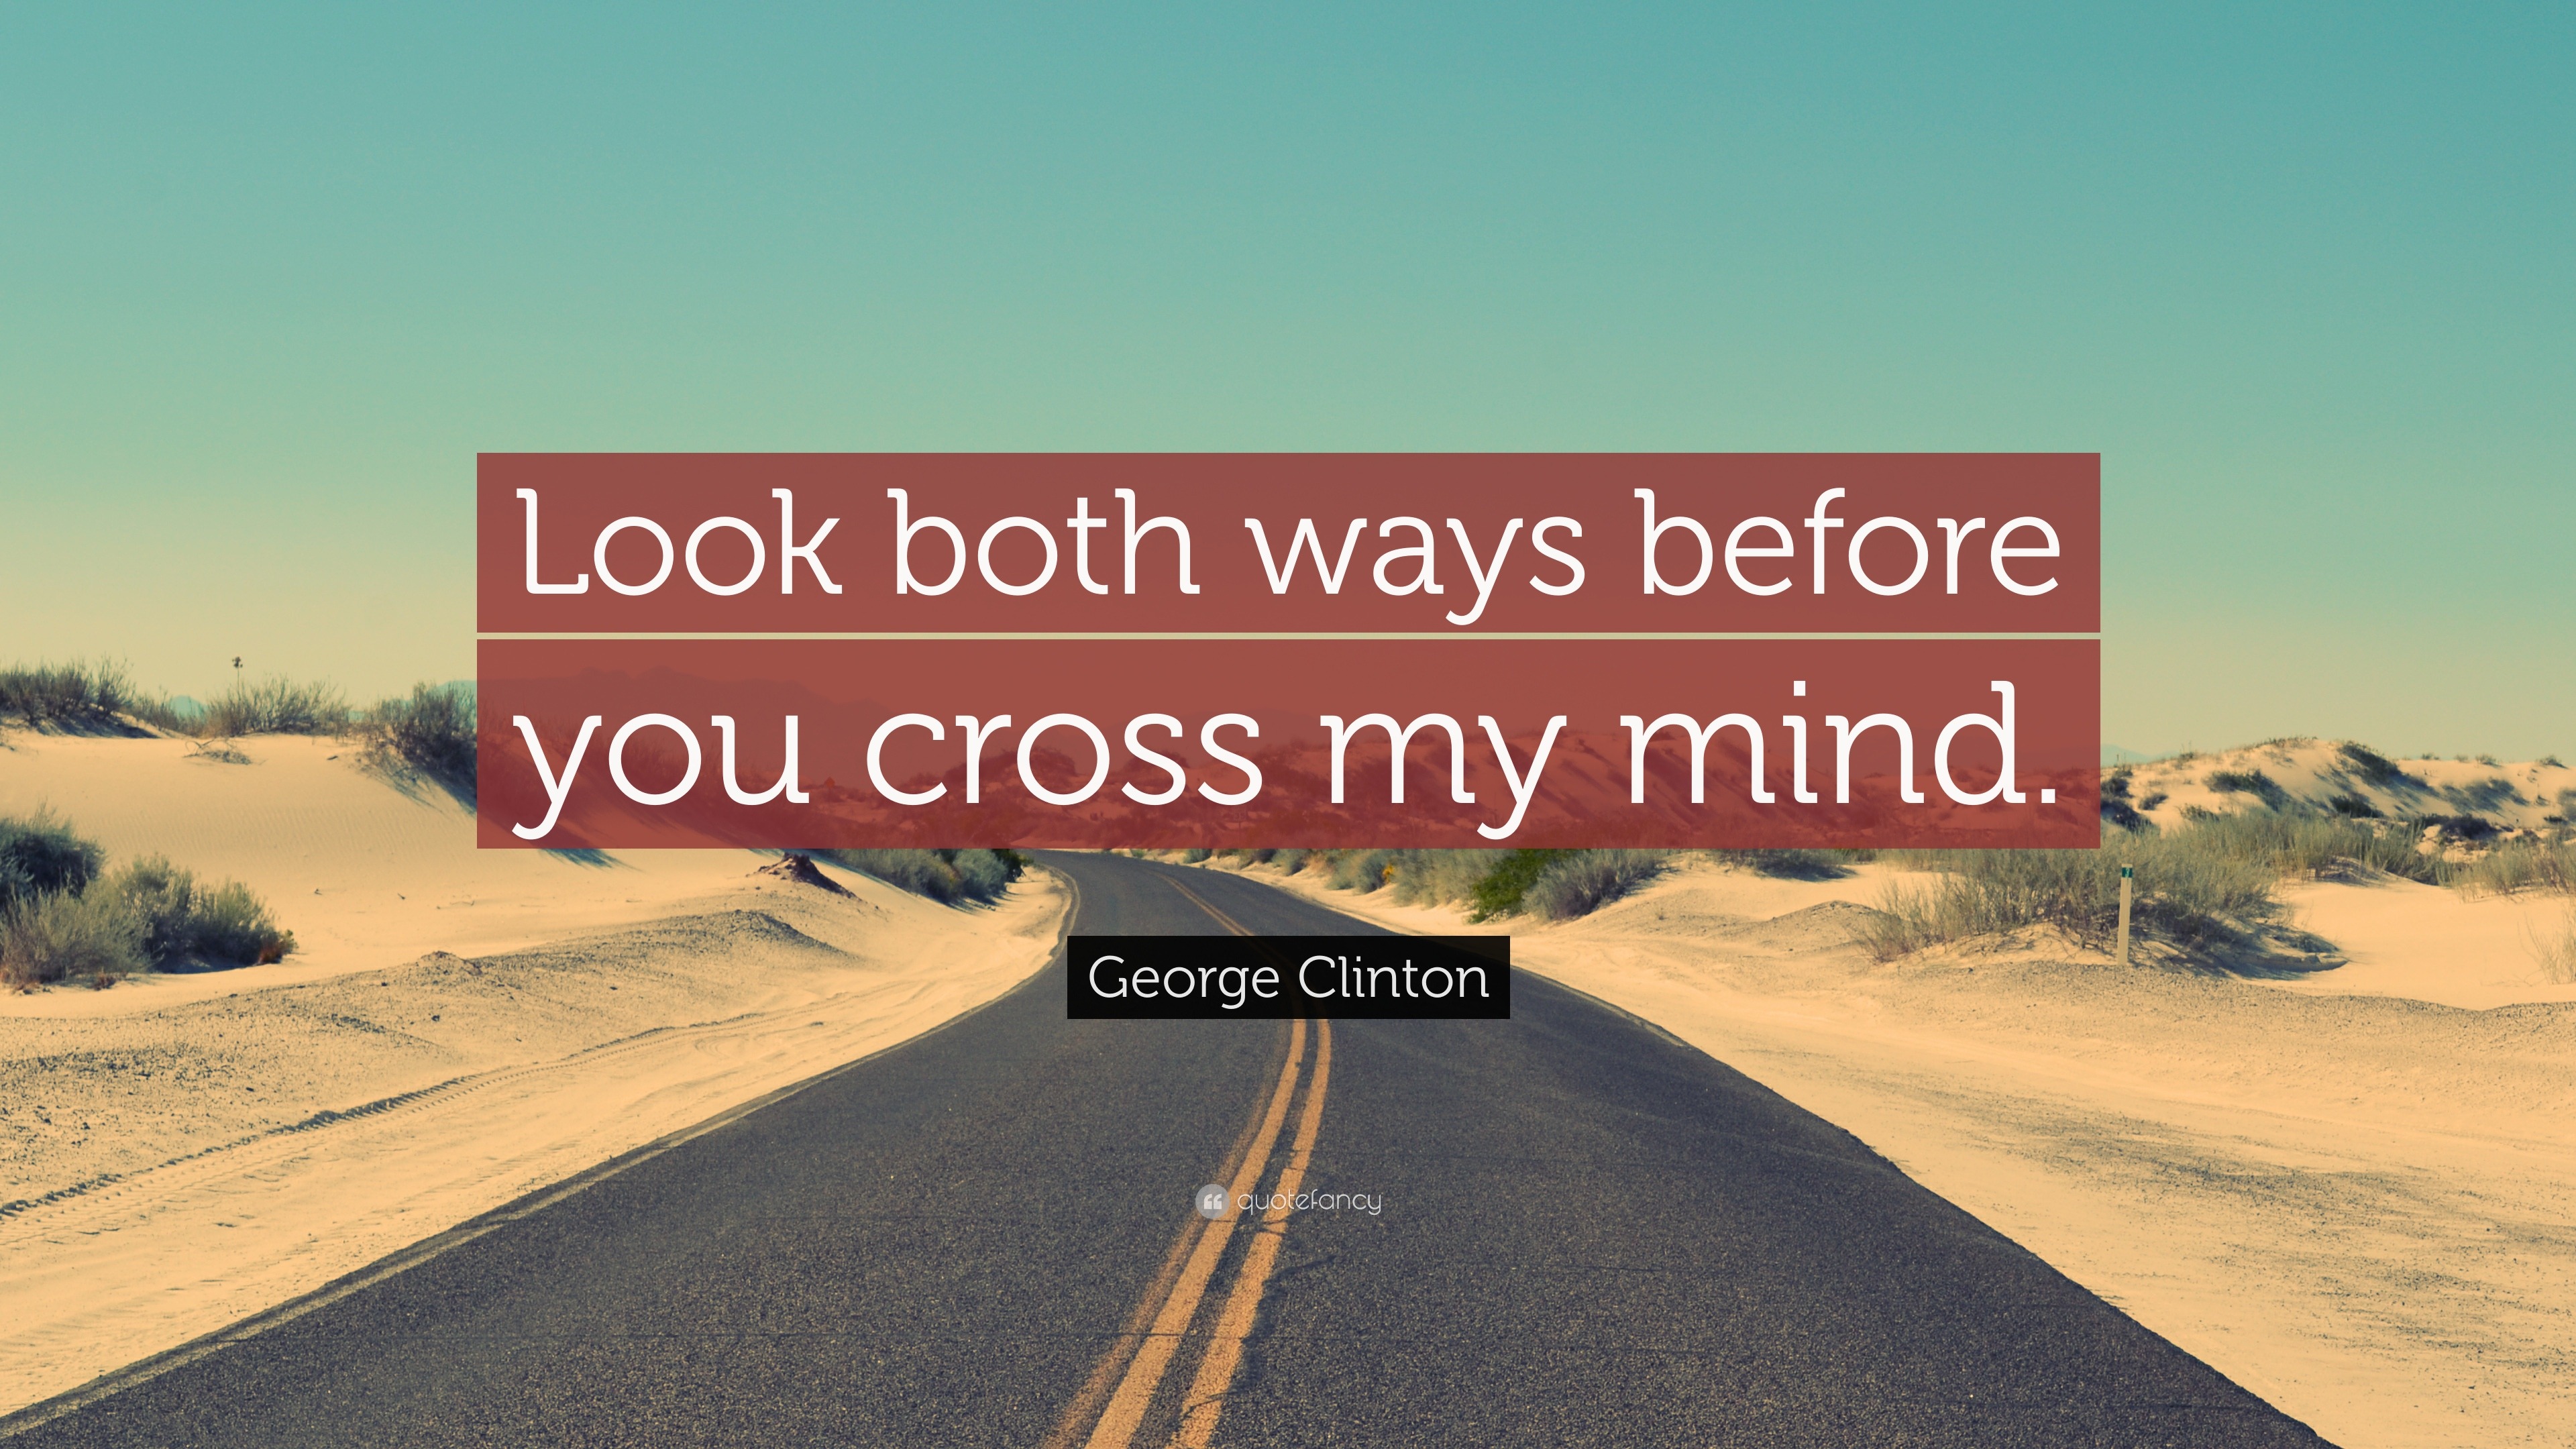 George Clinton Quote: “Look both ways before you cross my mind.”